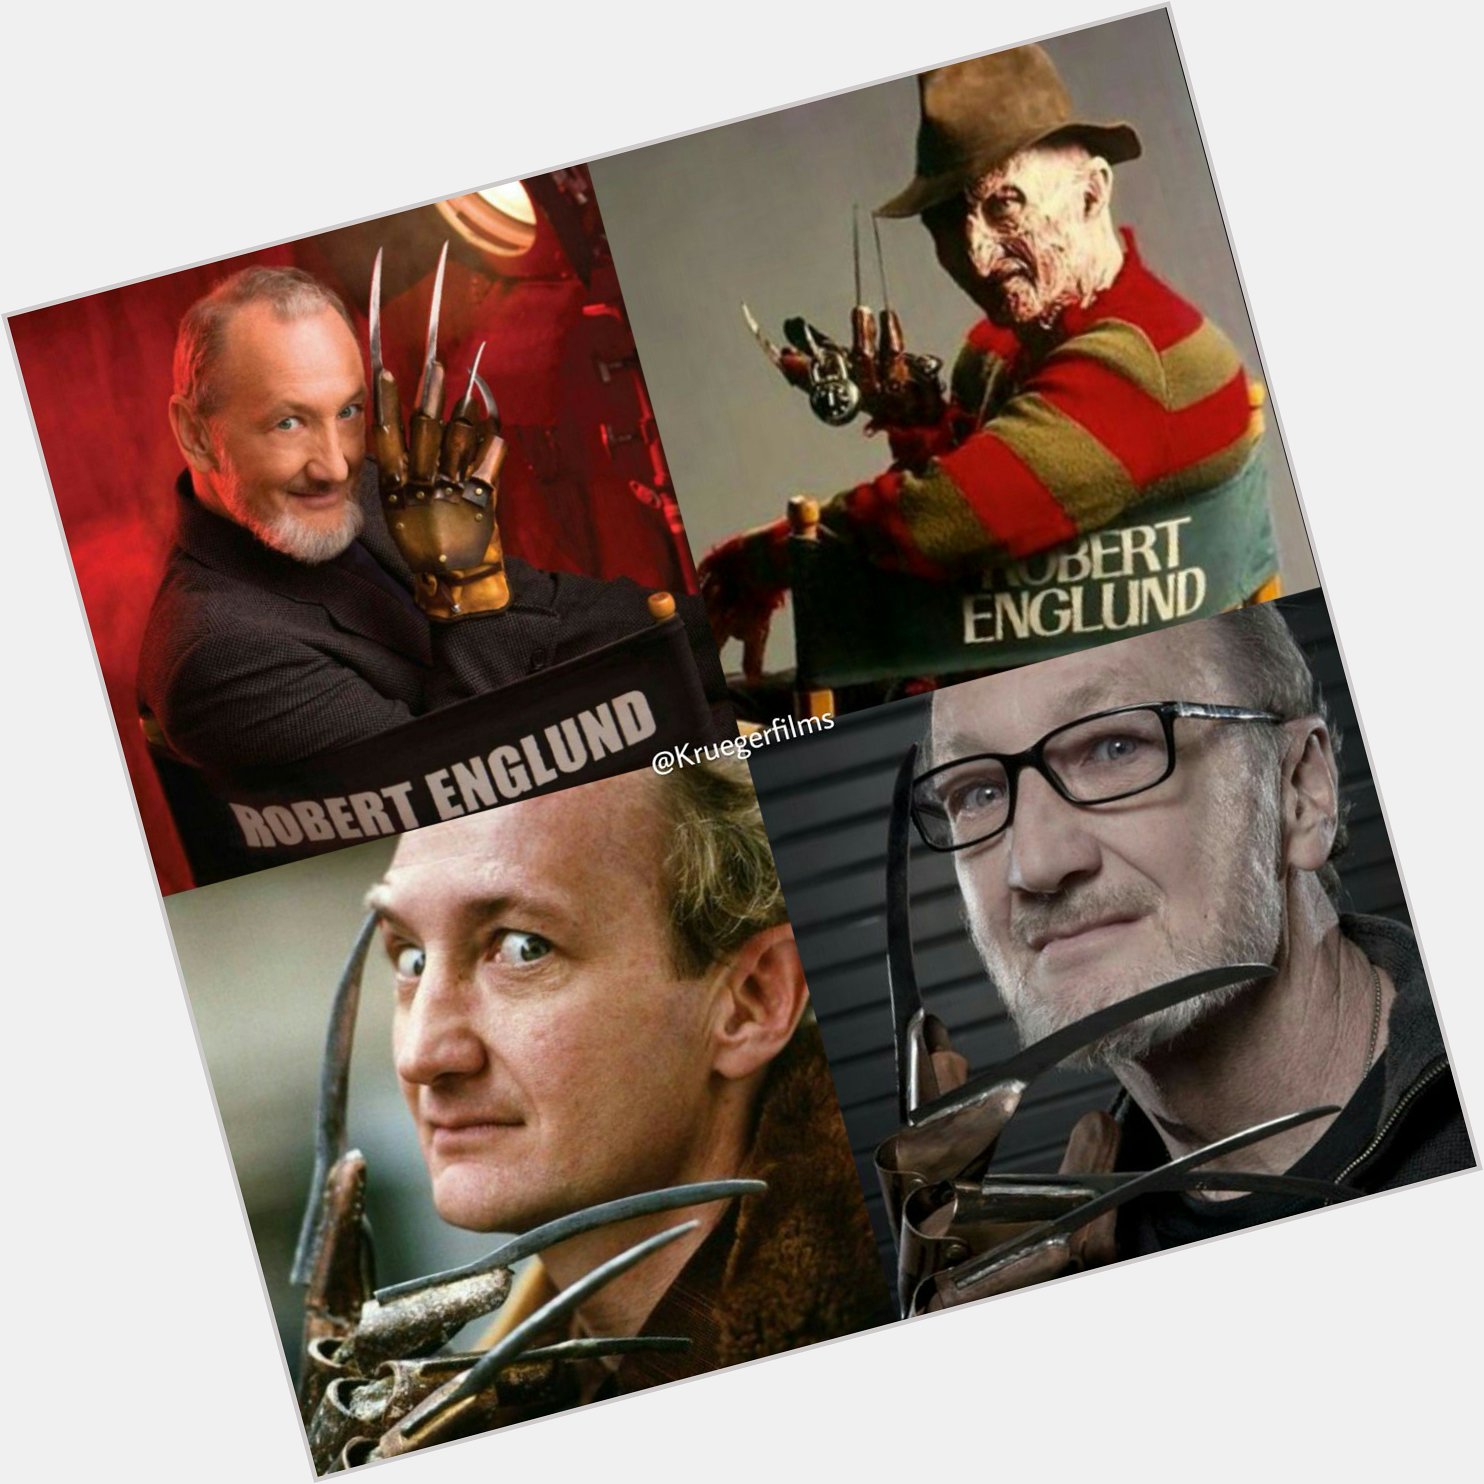 Happy 70th birthday to The Man. The Monster. The Legend. Mr. Robert Englund! 